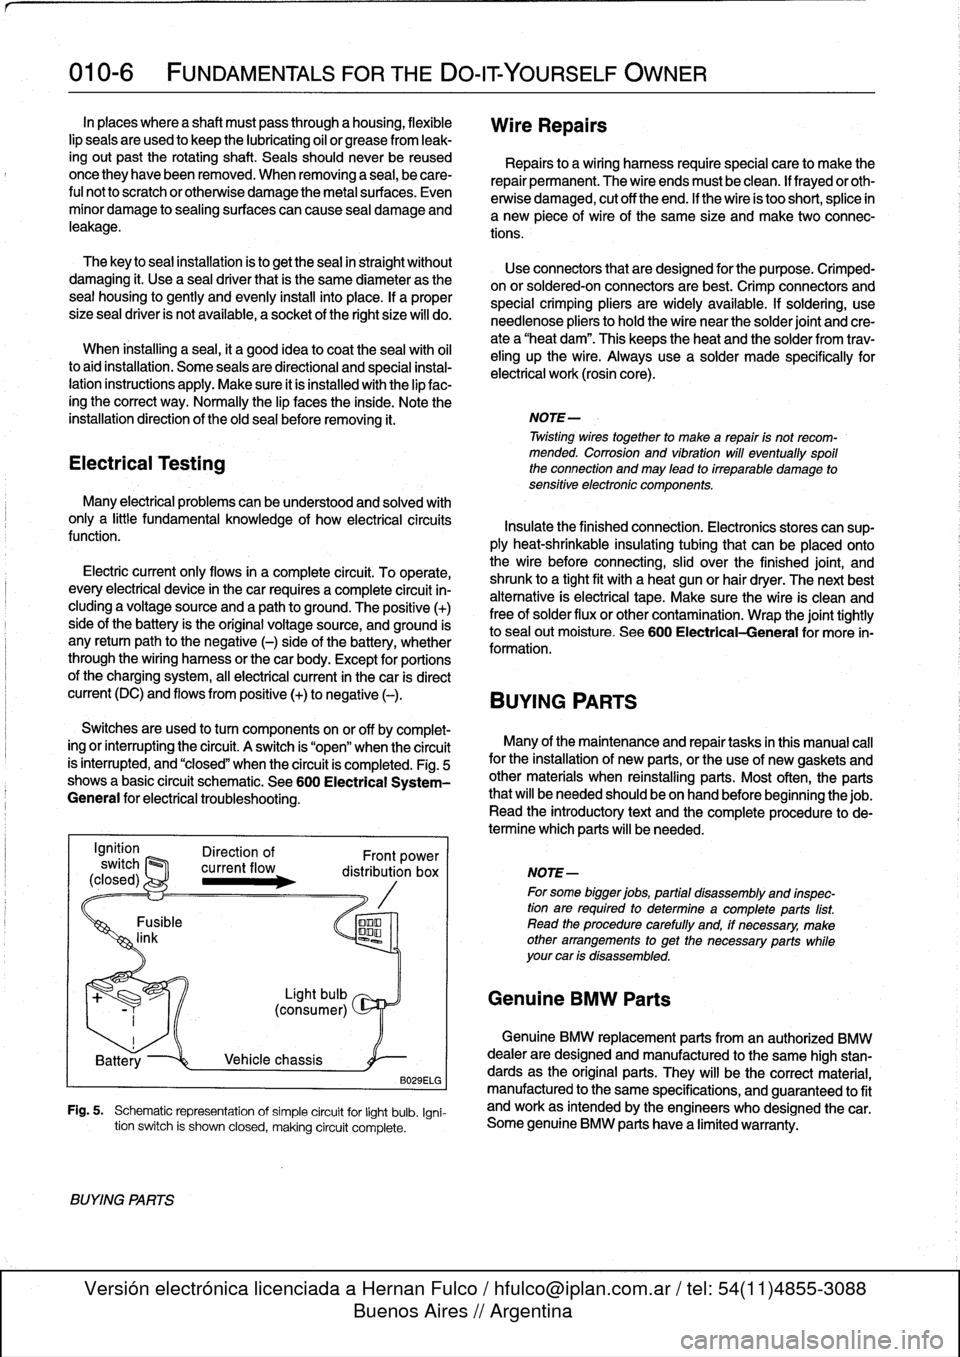 BMW M3 1998 E36 Workshop Manual 
010-
6

	

FUNDAMENTALS
FOR
THE
DO-ITYOURSELF
OWNER

In
places
where
a
shaft
mustpass
through
a
housing,
flexible
lip
seals
areused
to
keep
the
lubricating
oil
or
grease
from
leak-

ingout
past
the
r